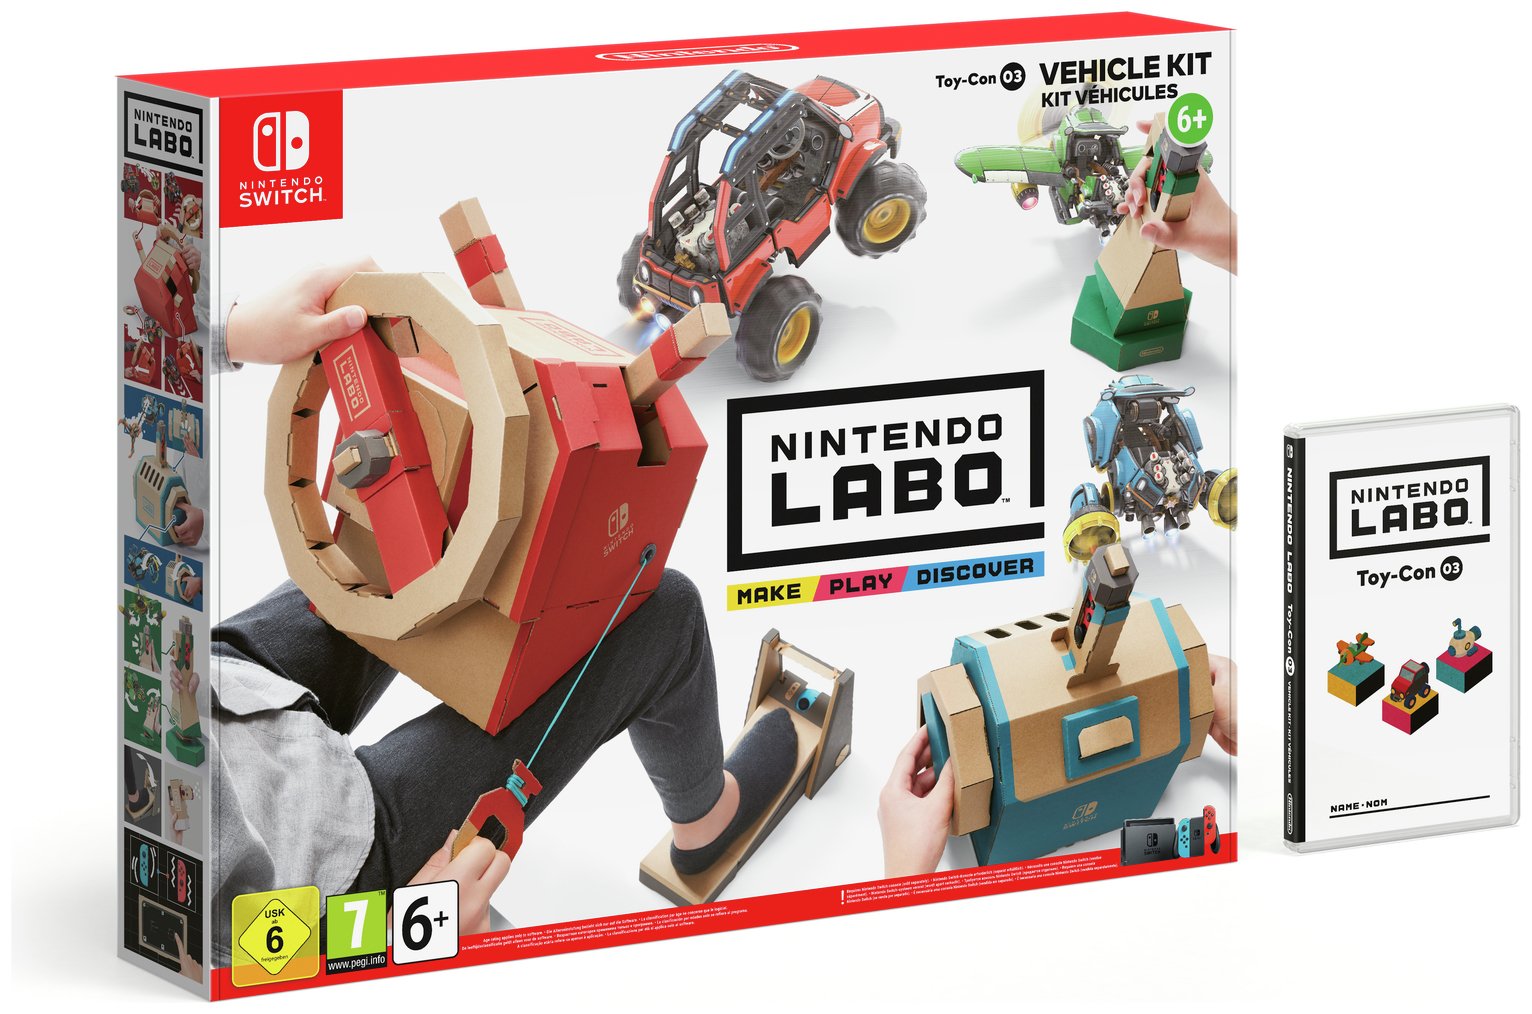 Nintendo LABO Toy-Con 03: Vehicle Kit Review